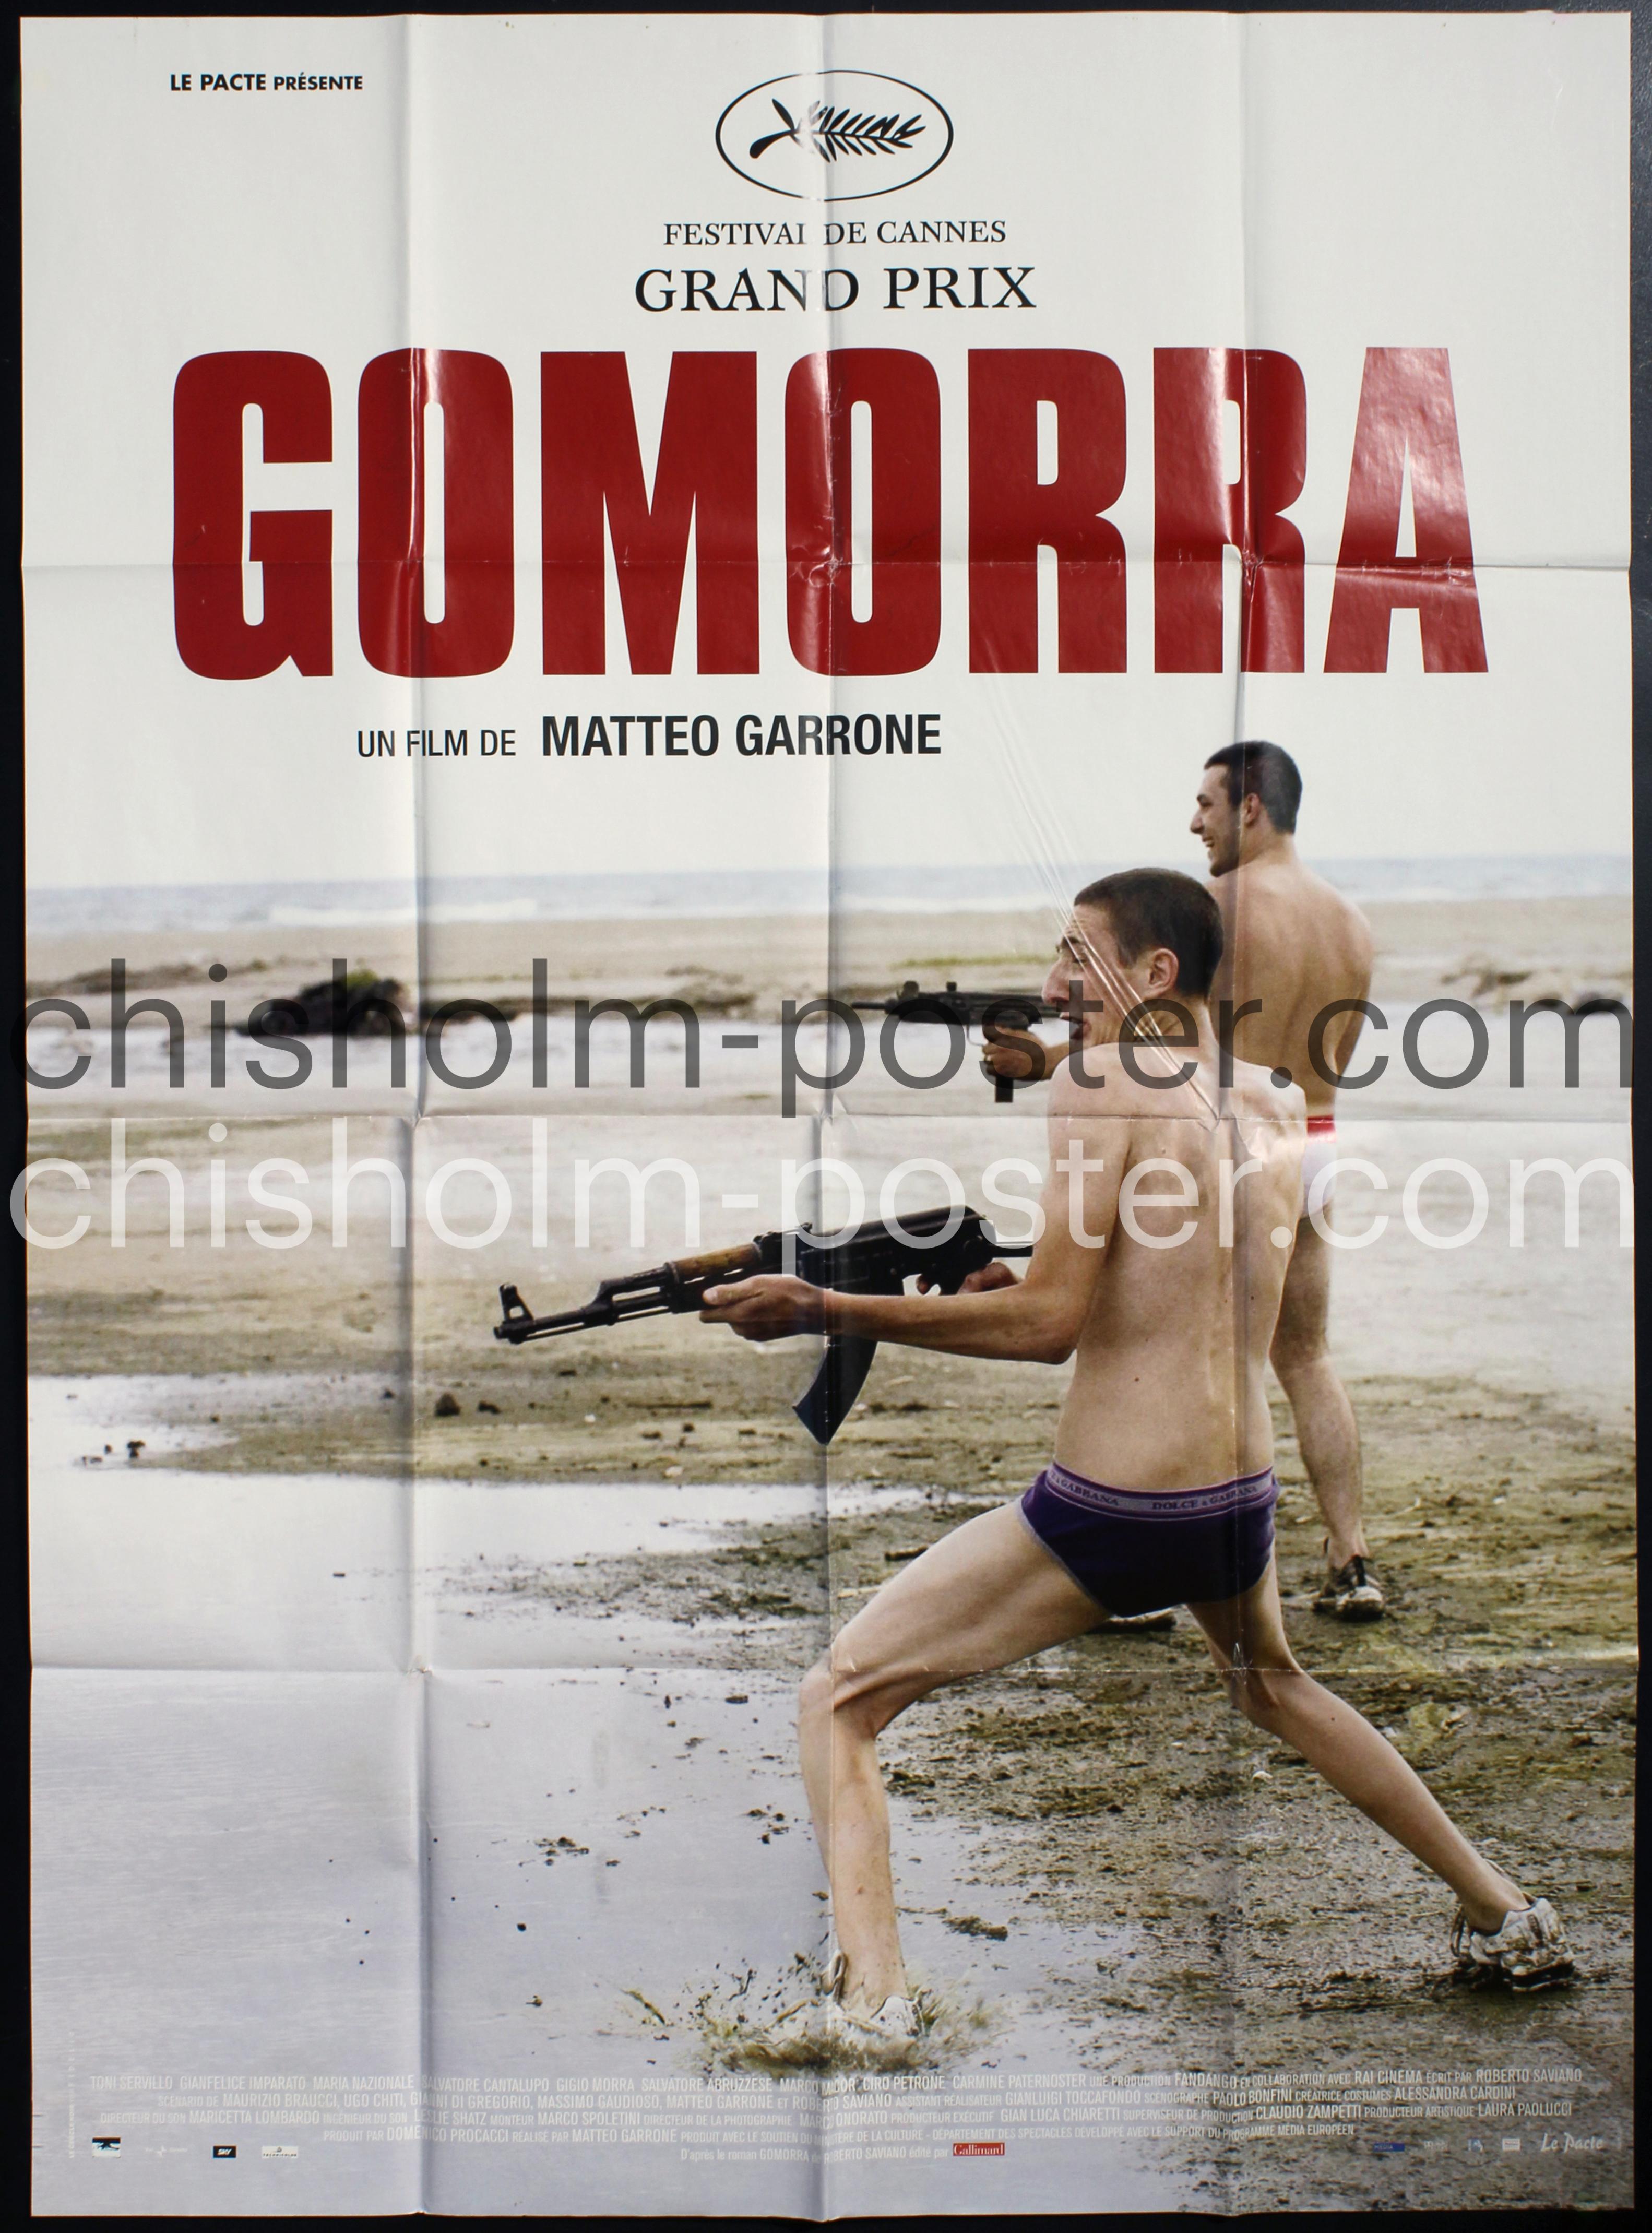 Fratelli Per Sempre - L'immortale and Gomorra  Poster for Sale by 868  Paper